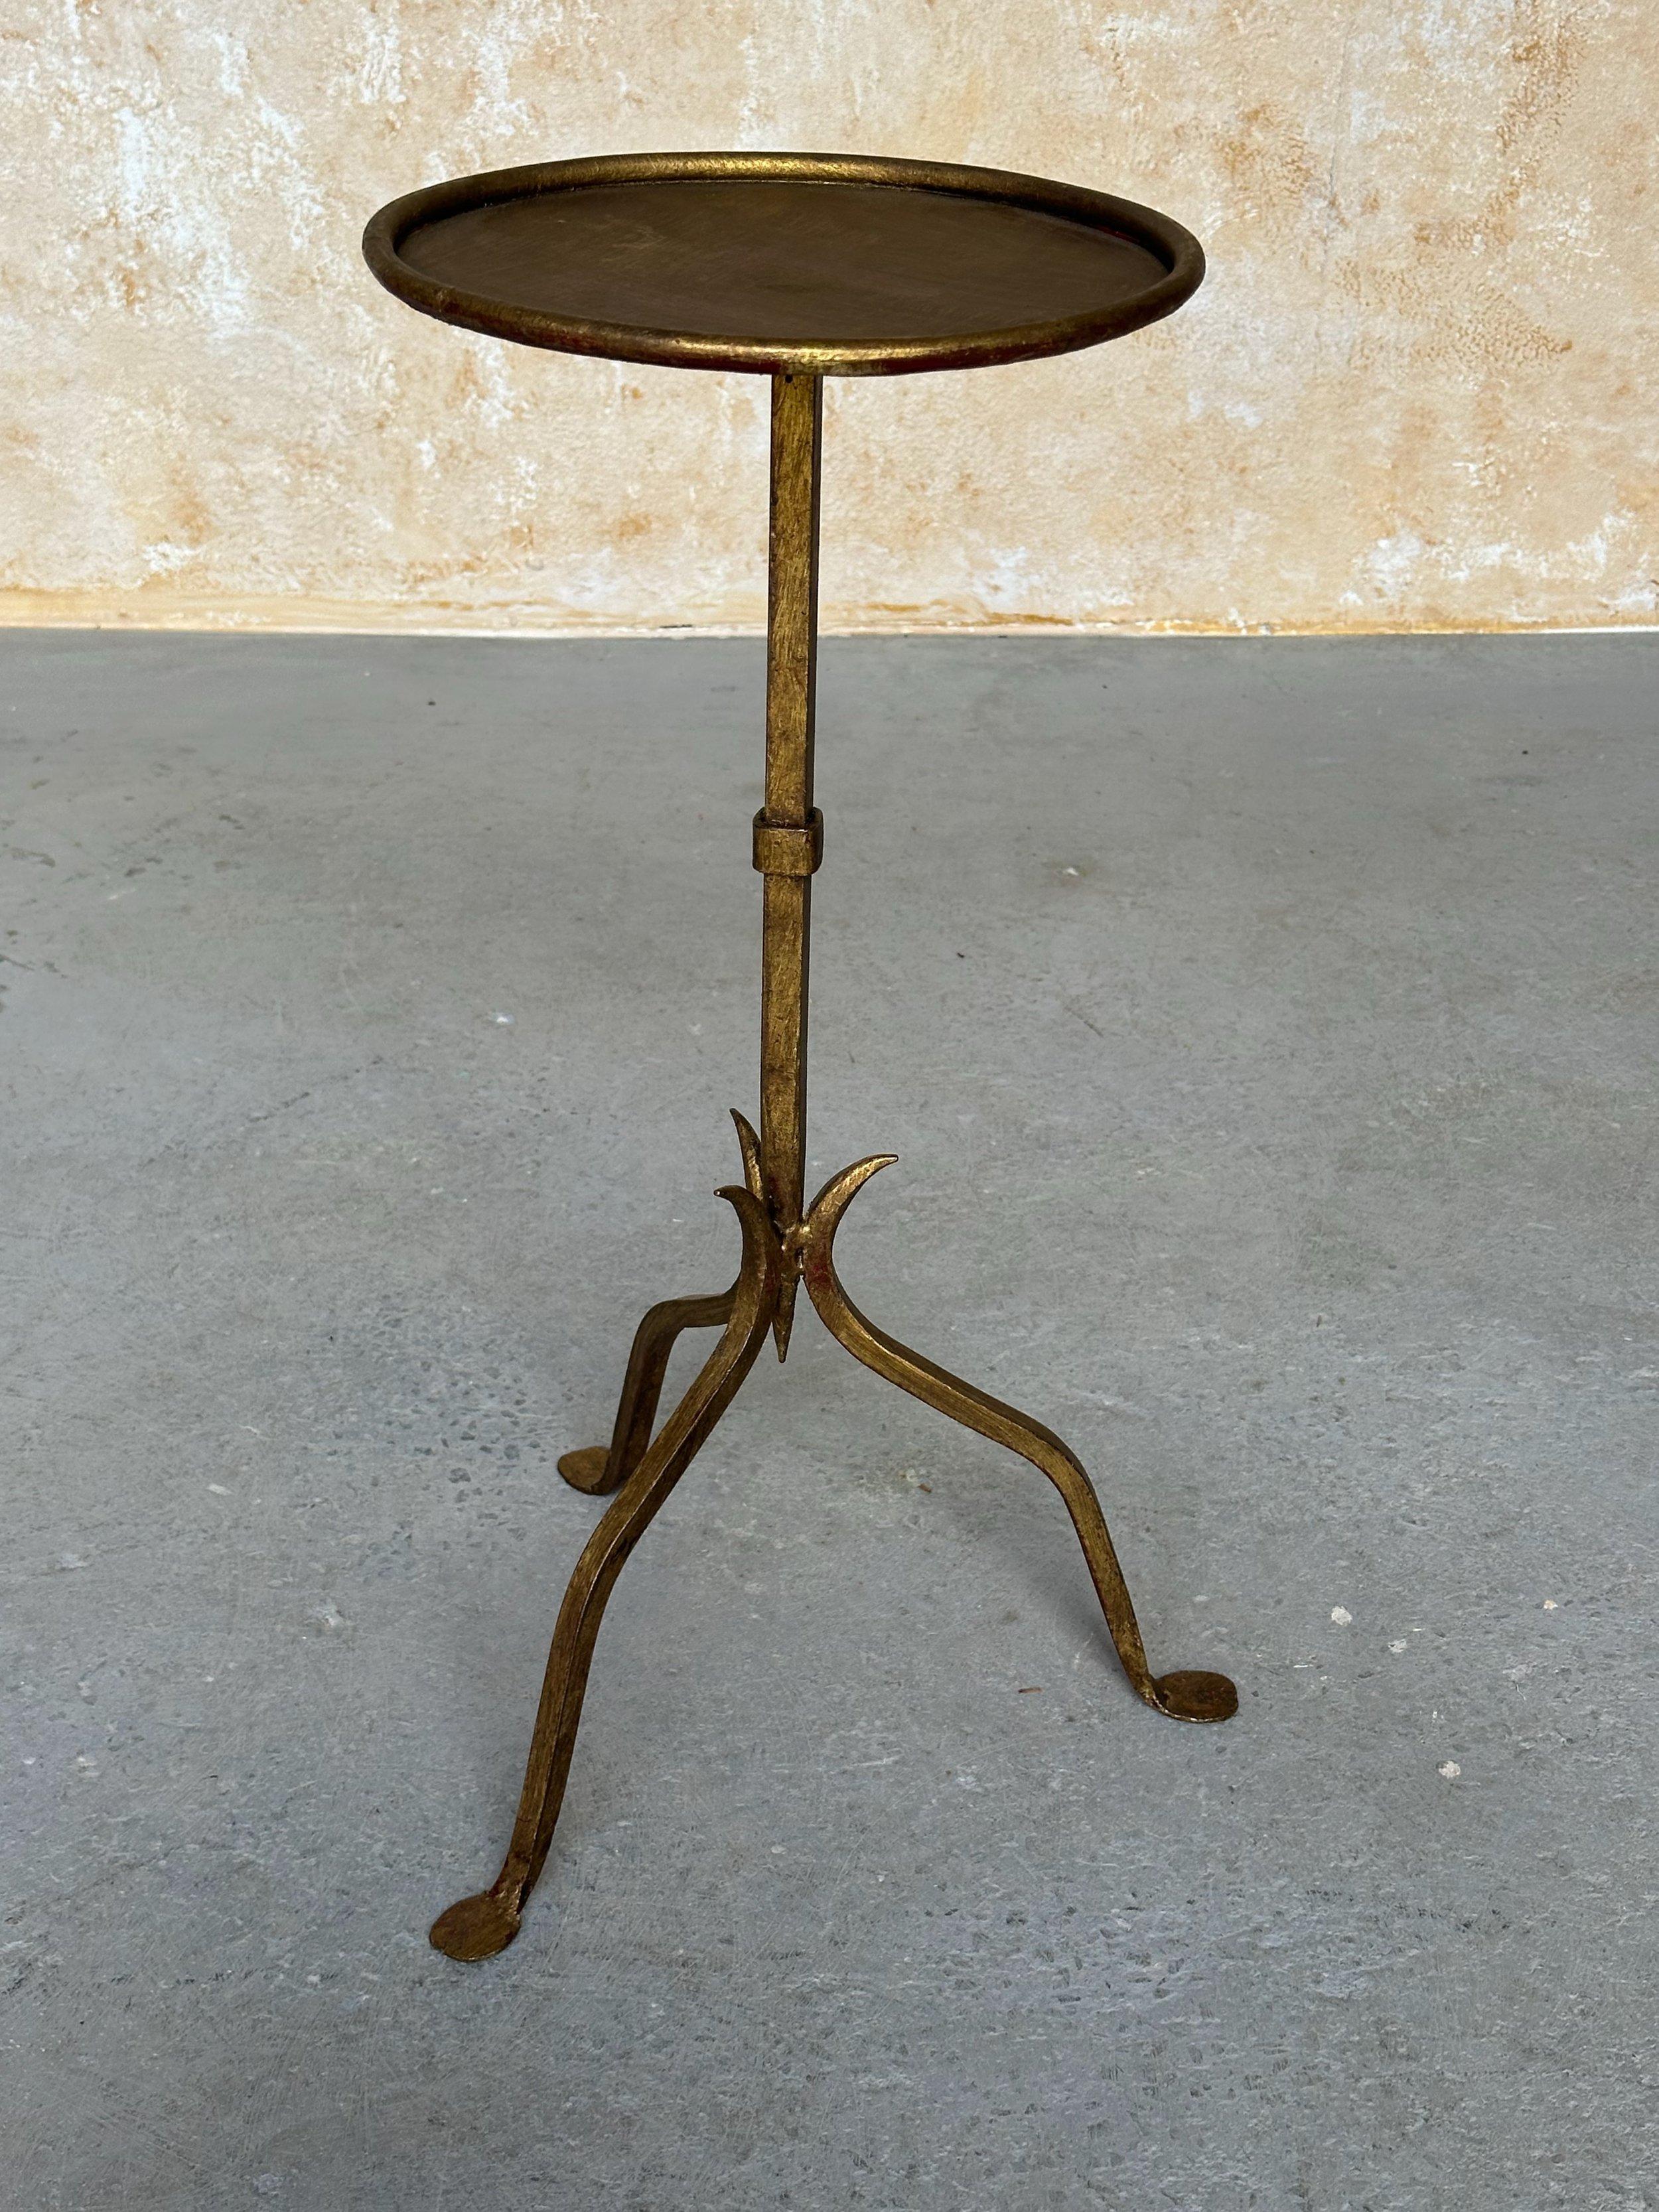 Small Spanish Iron Drinks Table with Pointed Stem In Good Condition For Sale In Buchanan, NY